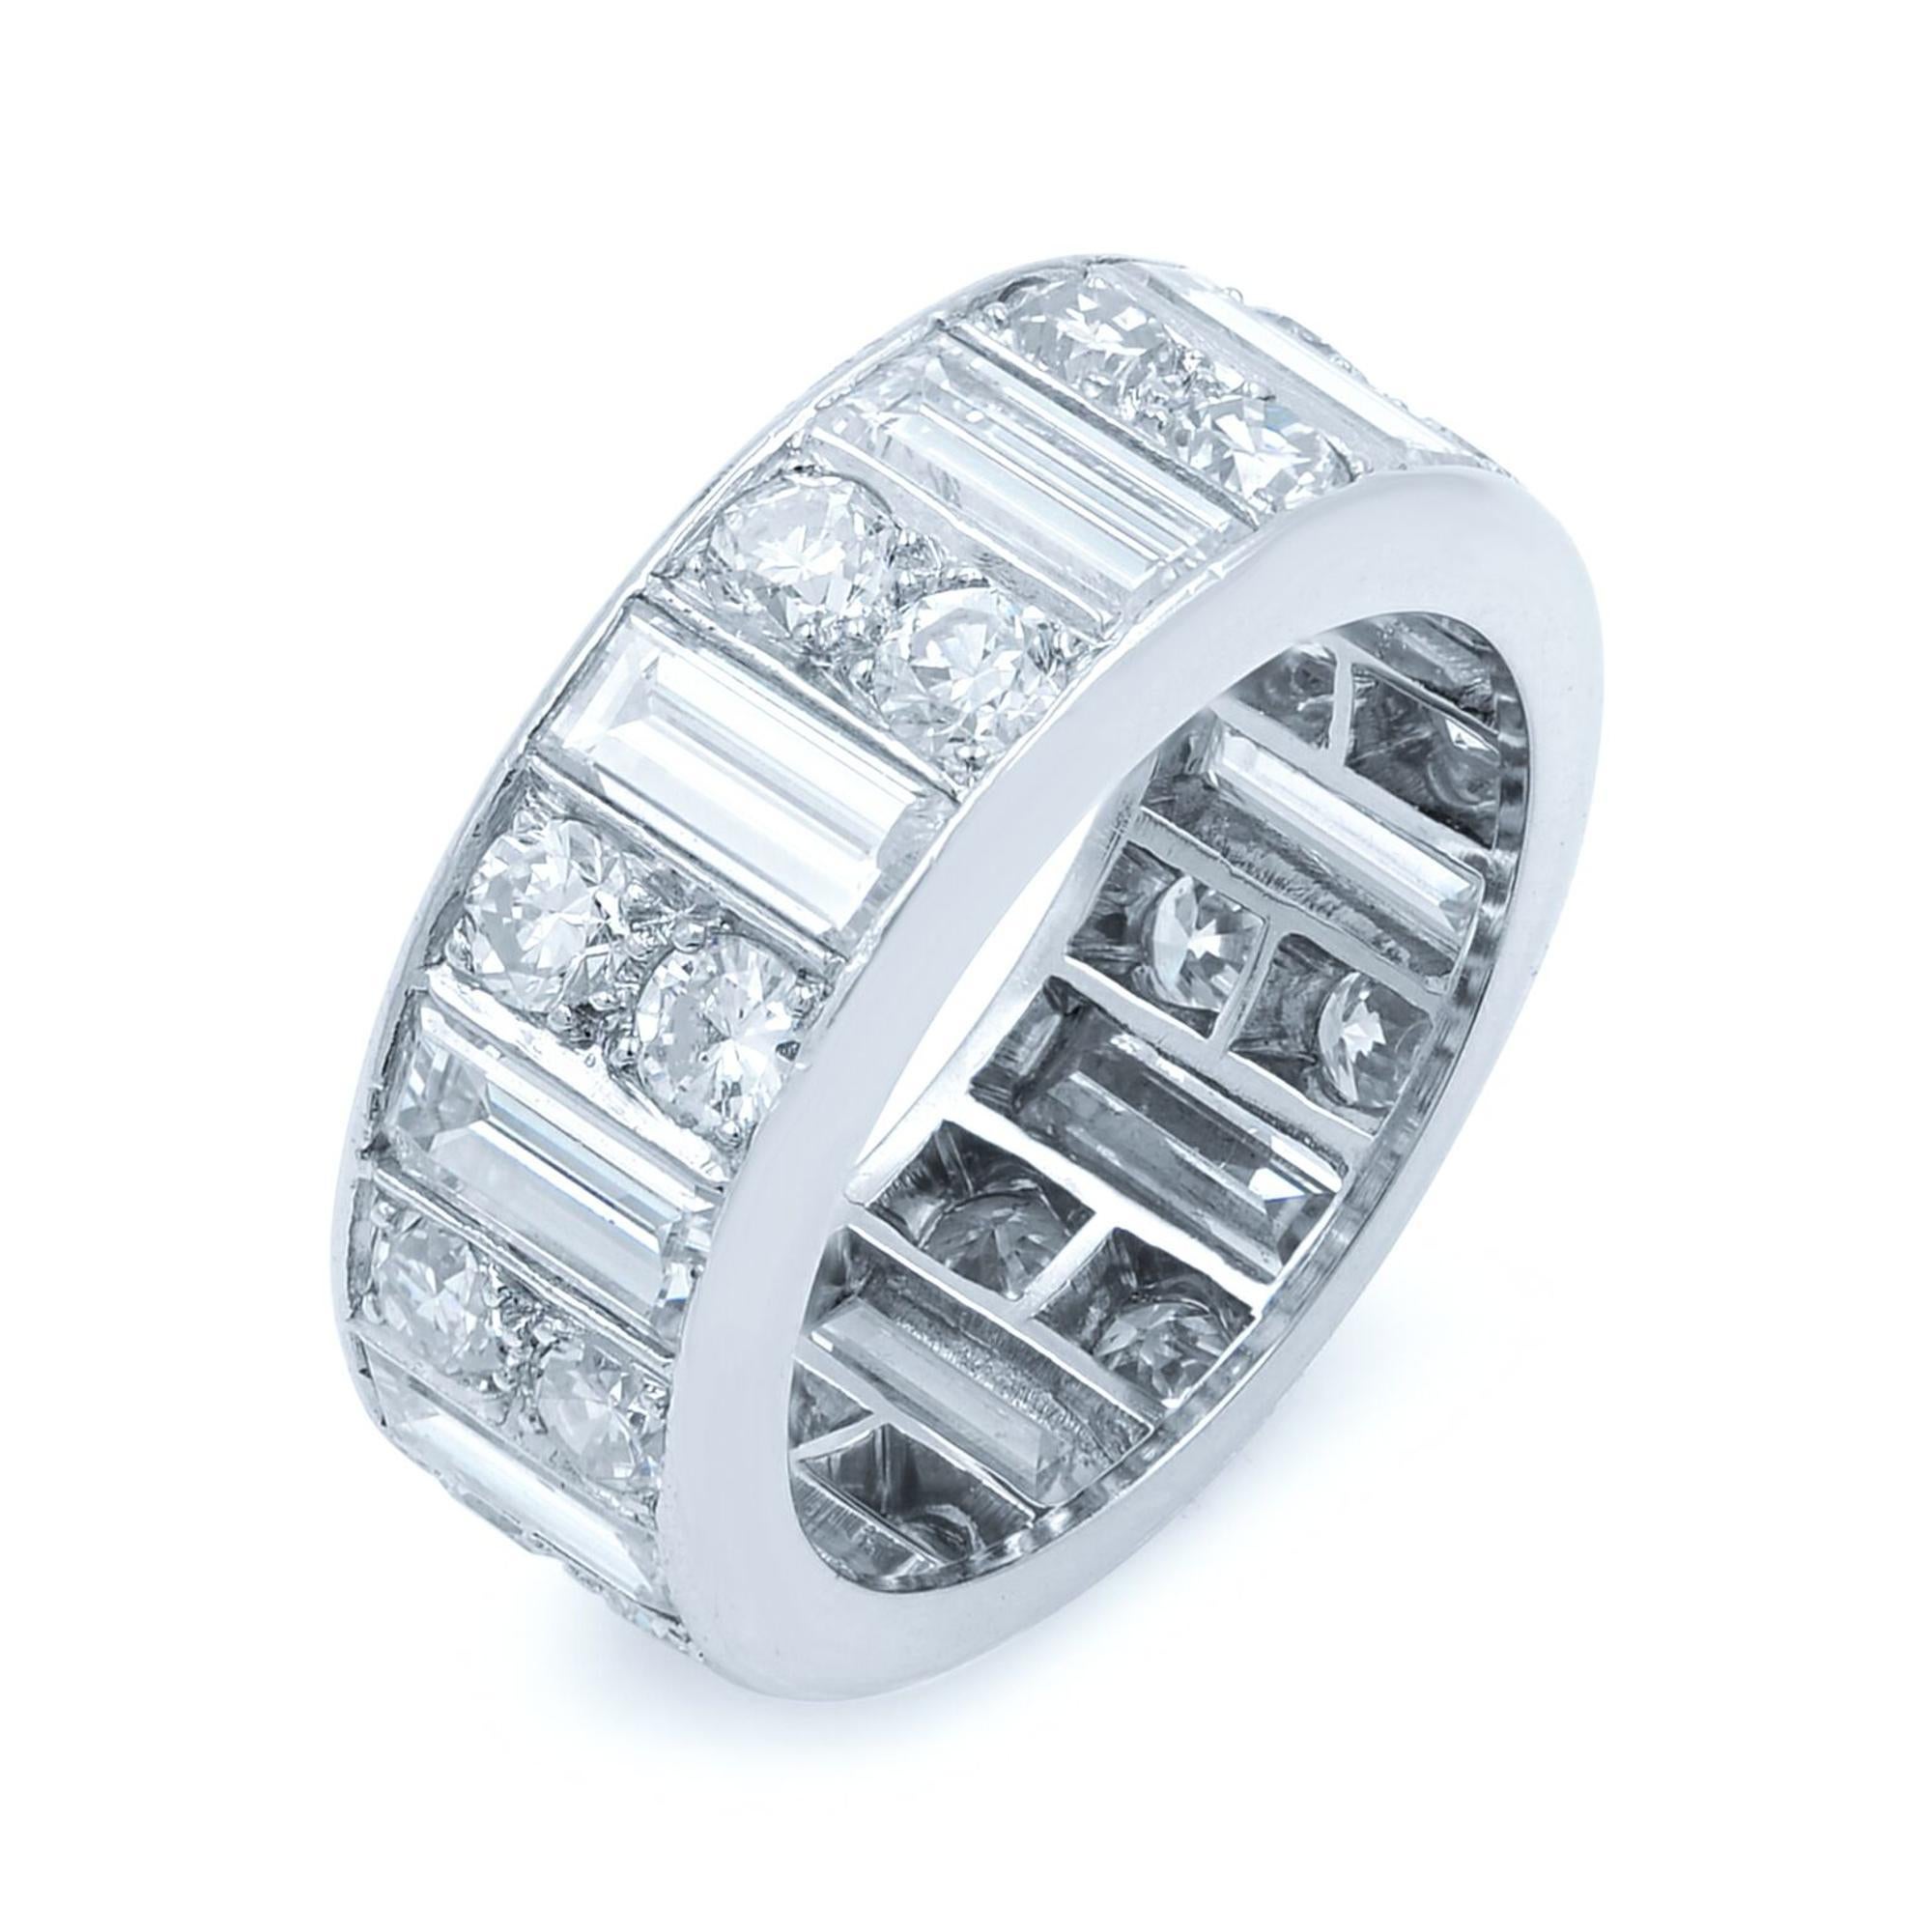 This eternity band is featuring 20 round cut diamonds totaling 1.50 carats and 10 baguette cut diamonds totaling 2.50 carats. Width of the ring is 7.35 mm and thickness is 2.40 mm. Ring size 5.75. This band is a very luxurious piece with a stunning